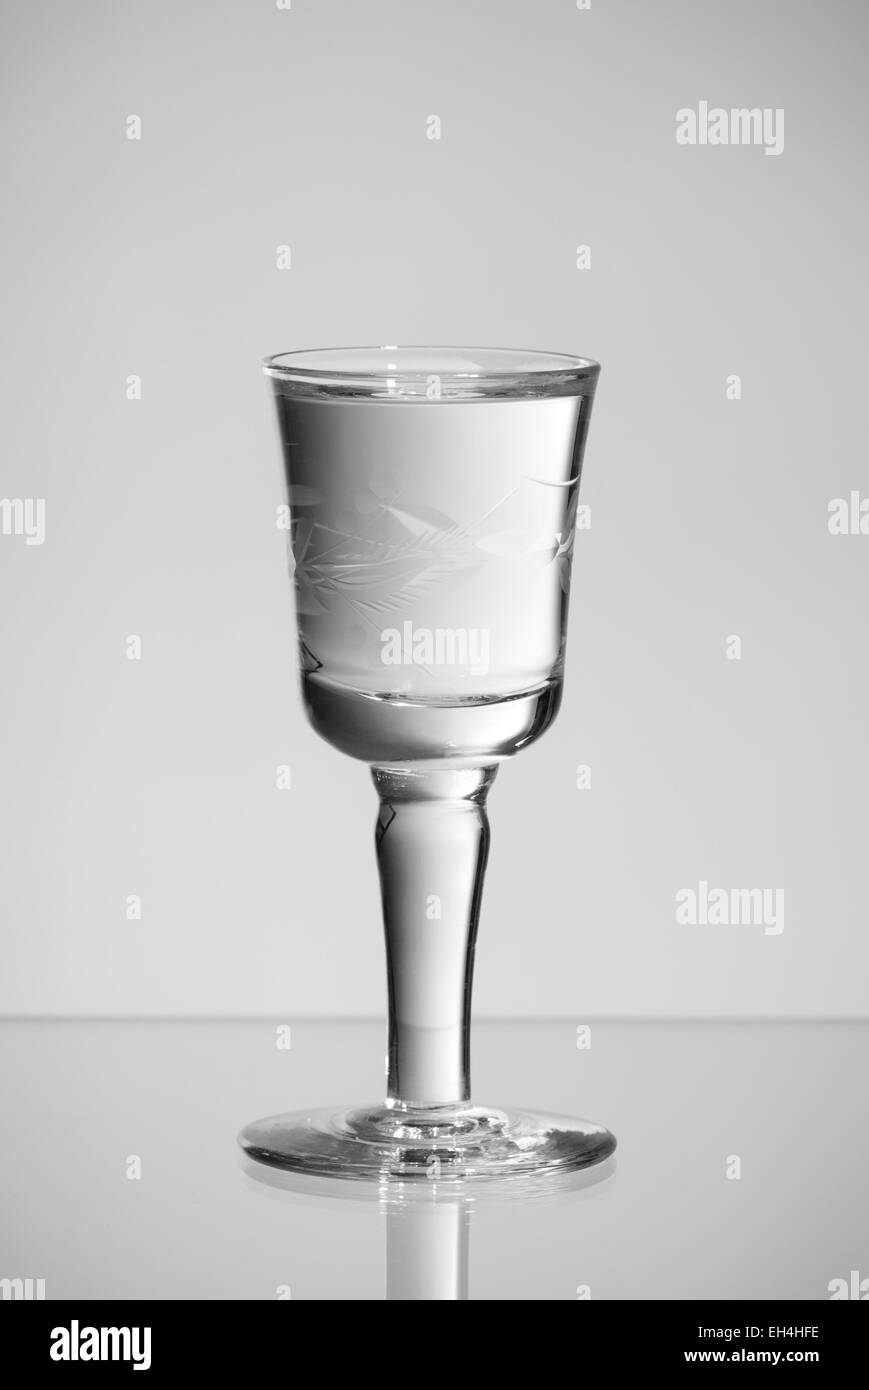 One stem glass of clear vodka Stock Photo